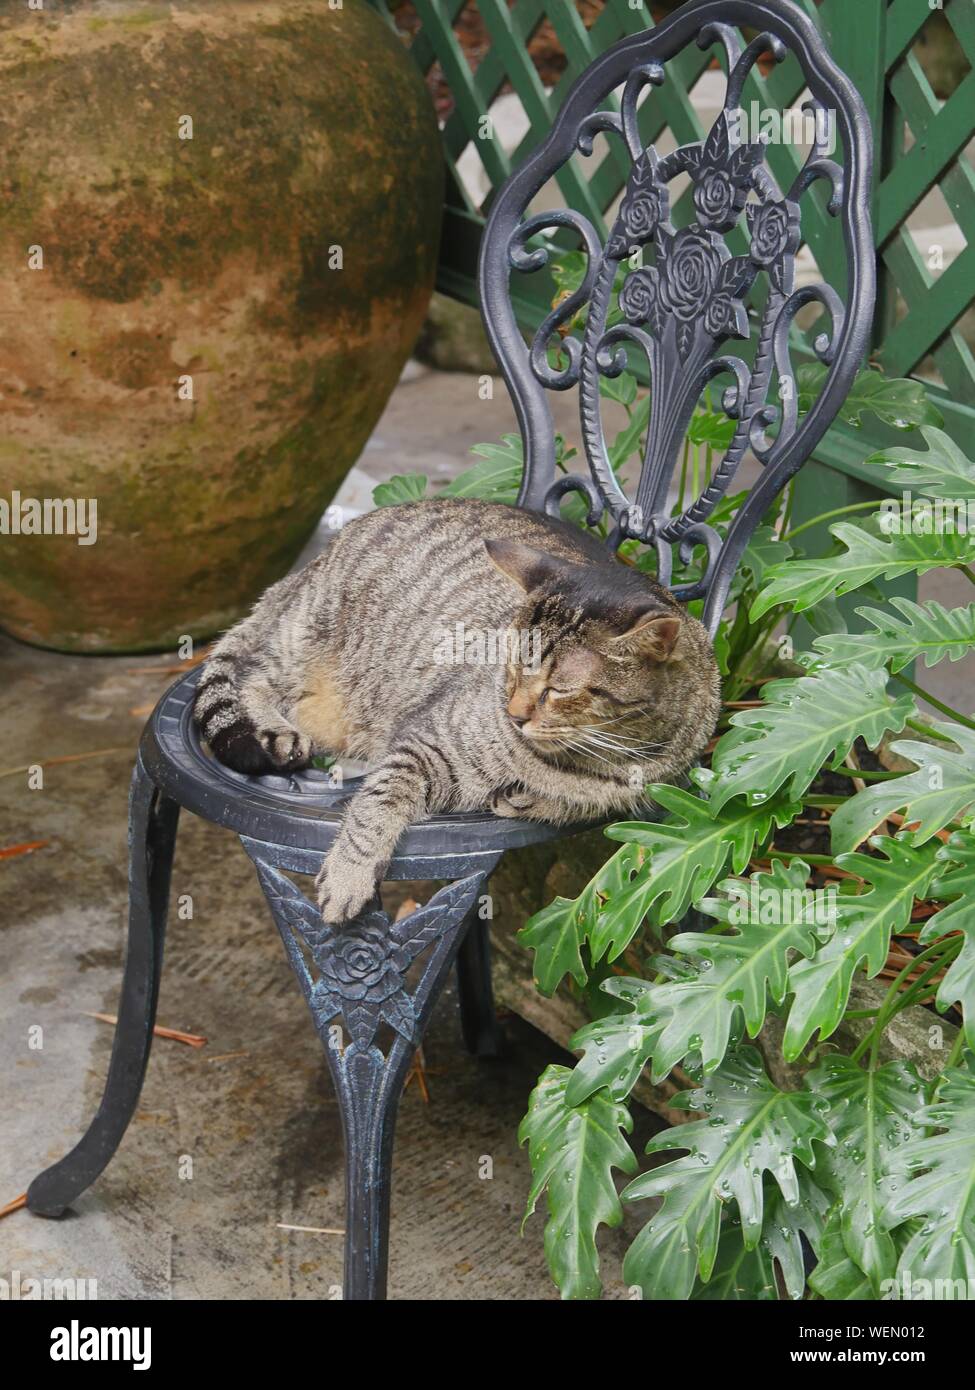 Wide shot of a tabby cat napping in a steel chair at the Hemingway house gardens in Key West, Florida. Stock Photo